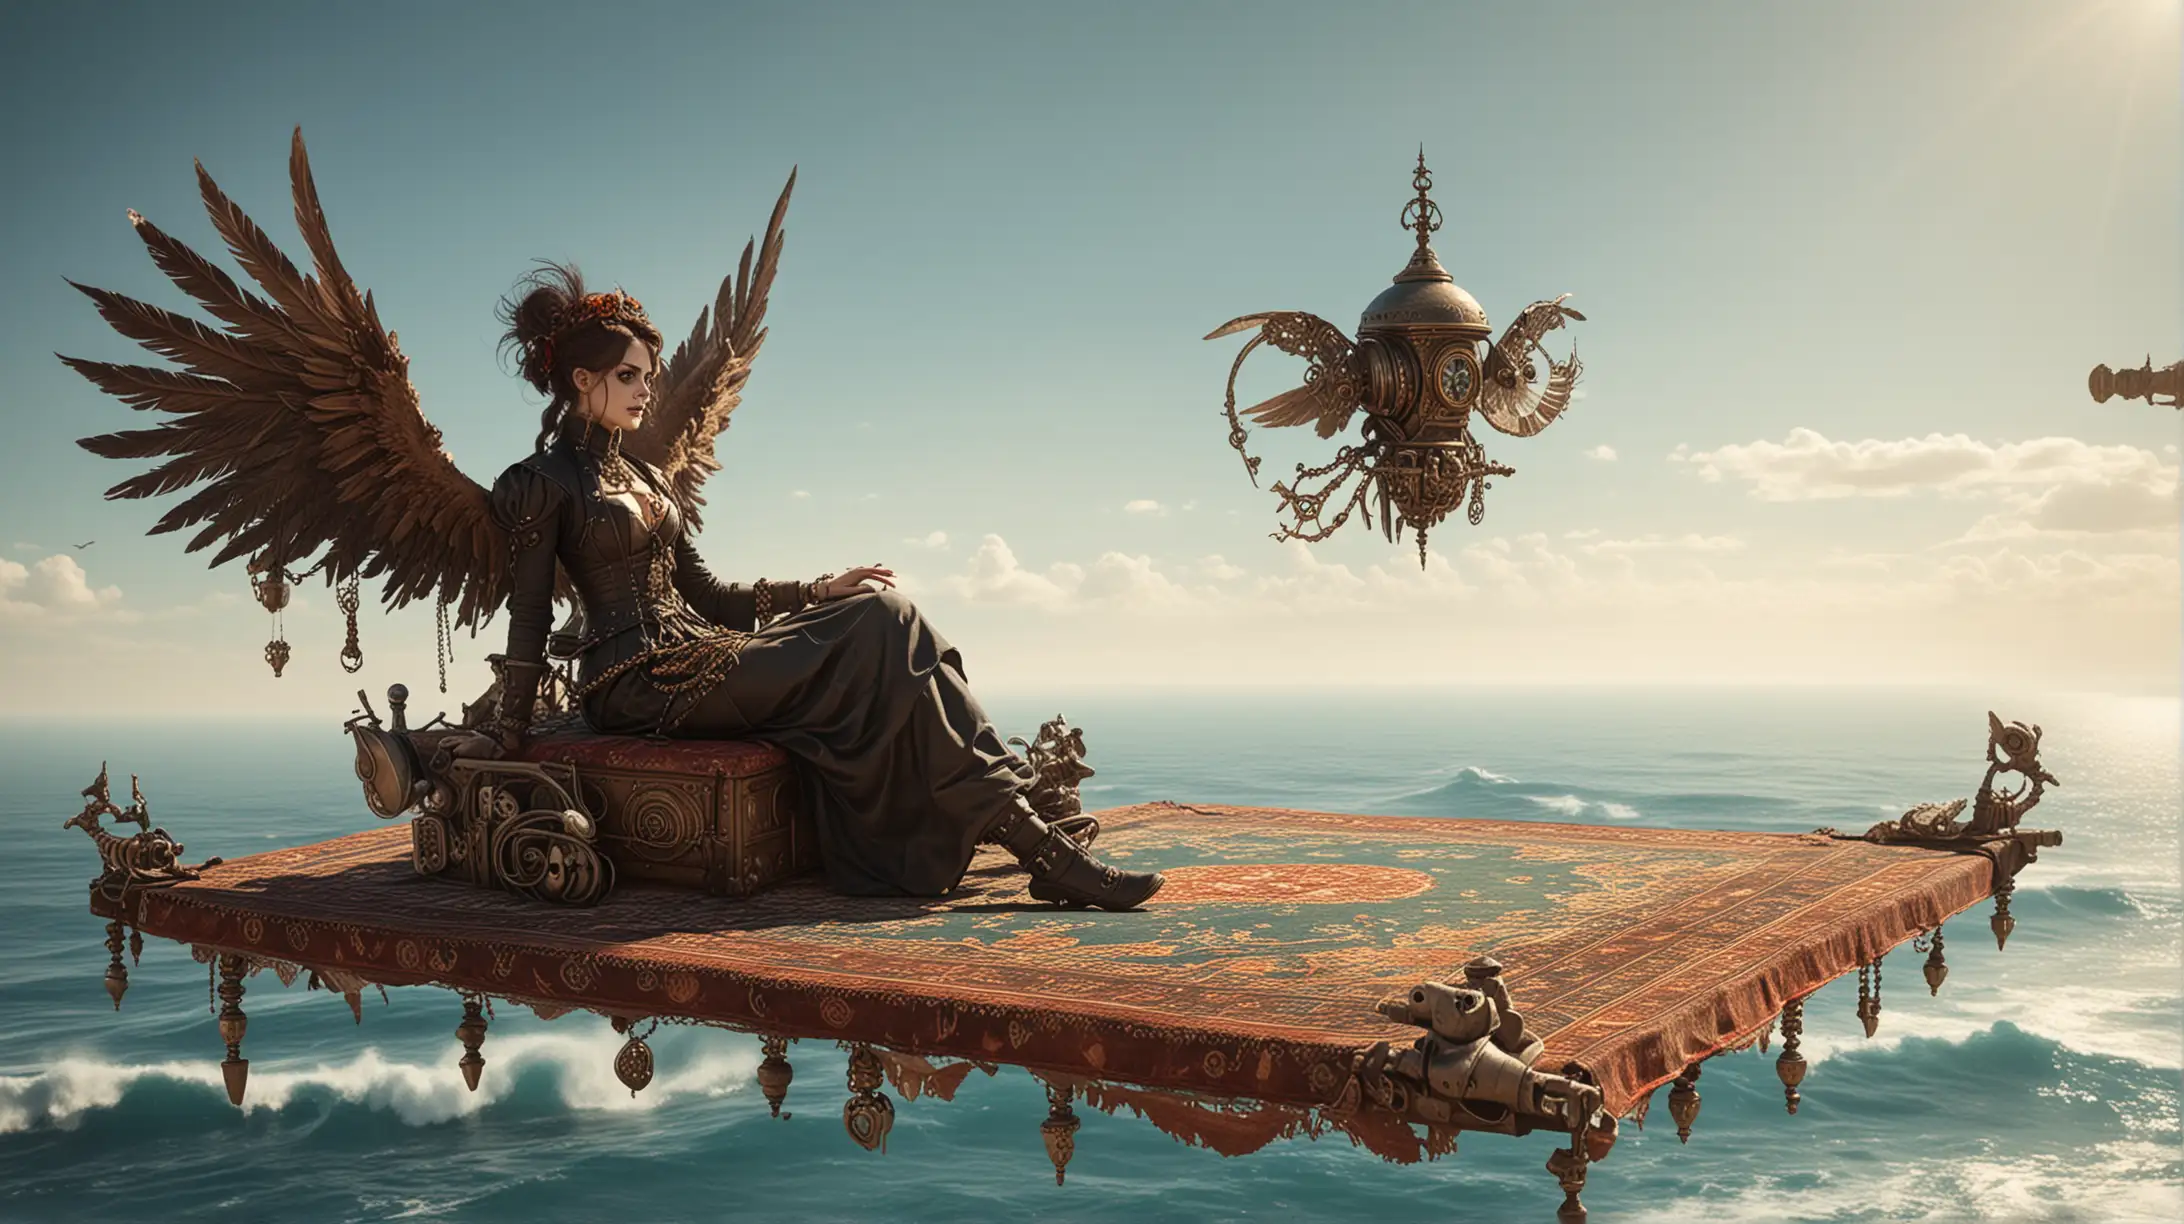 a steampunk necromancer sits on a magic carpet which flies over the sea, sunny